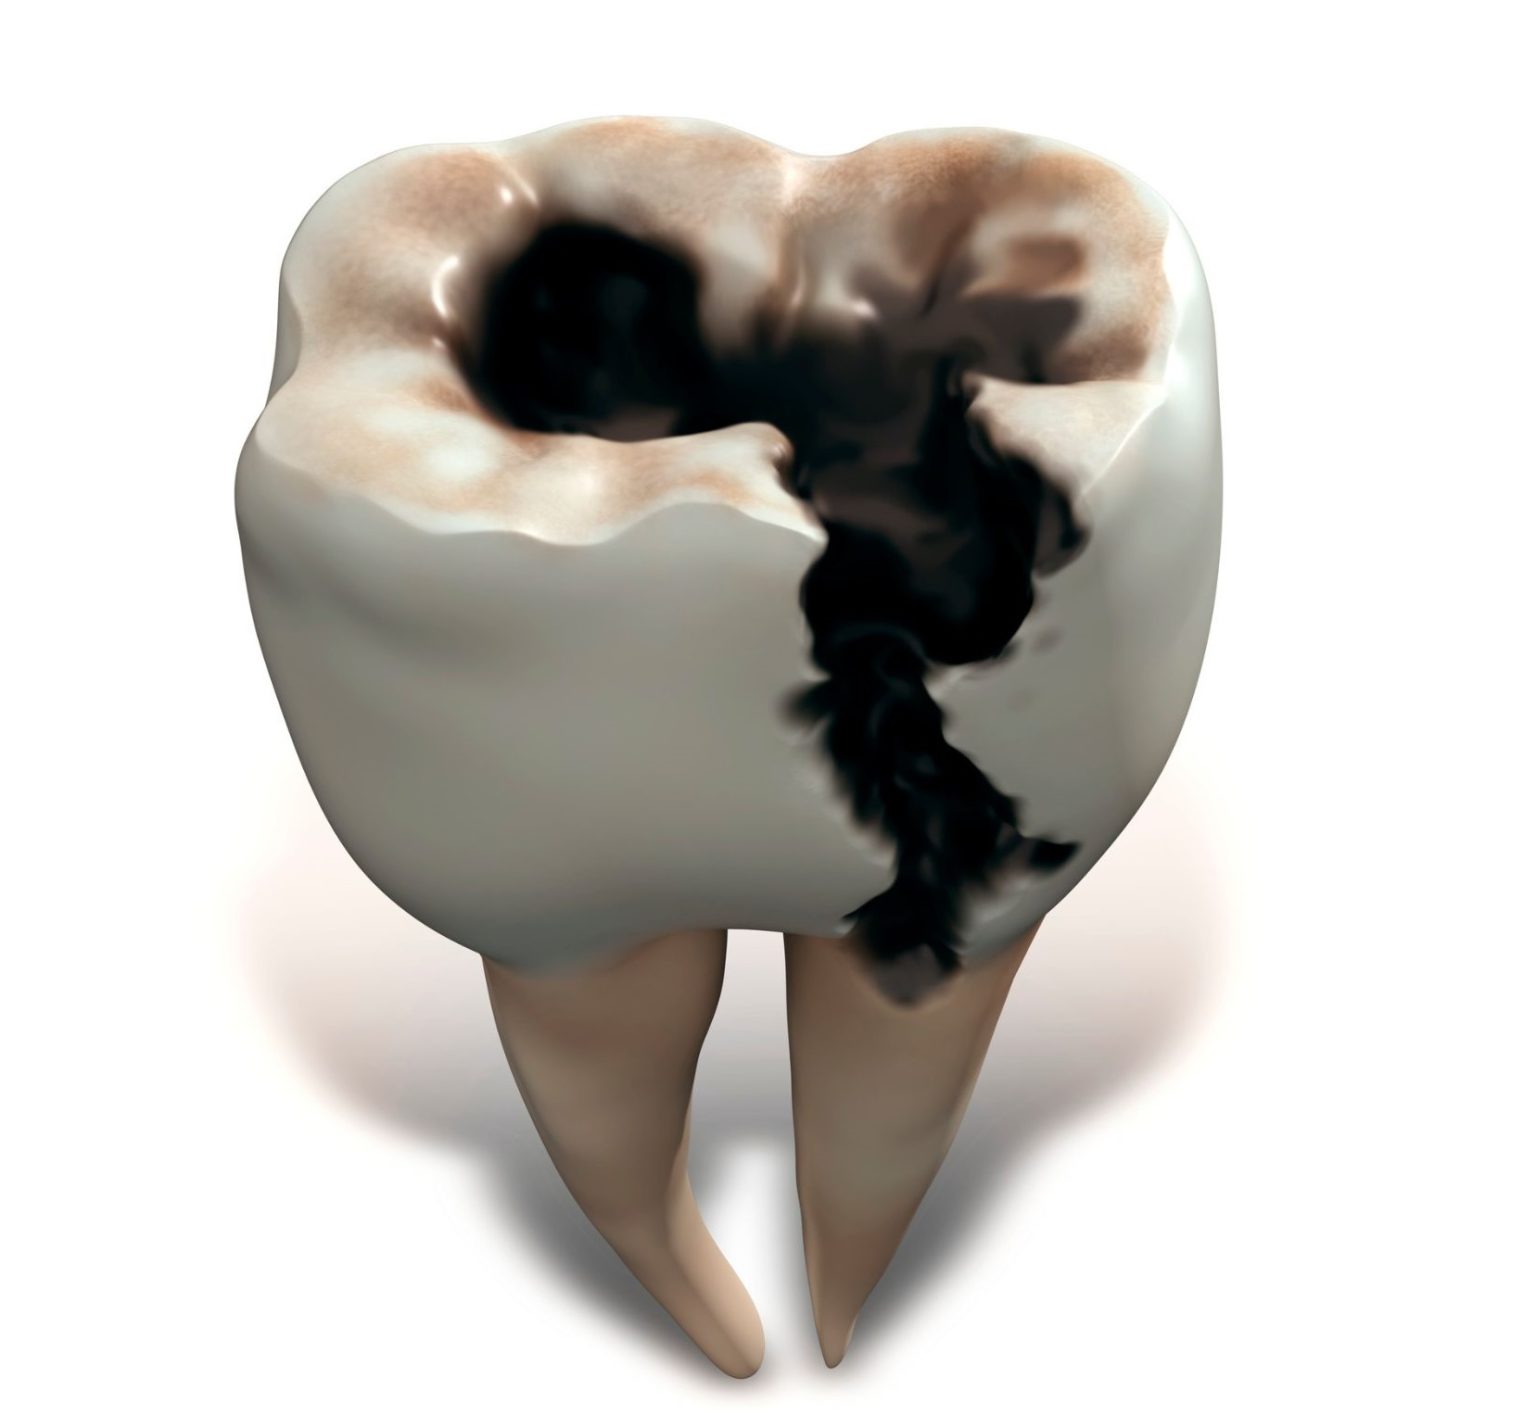 decayed wisdom tooth featured